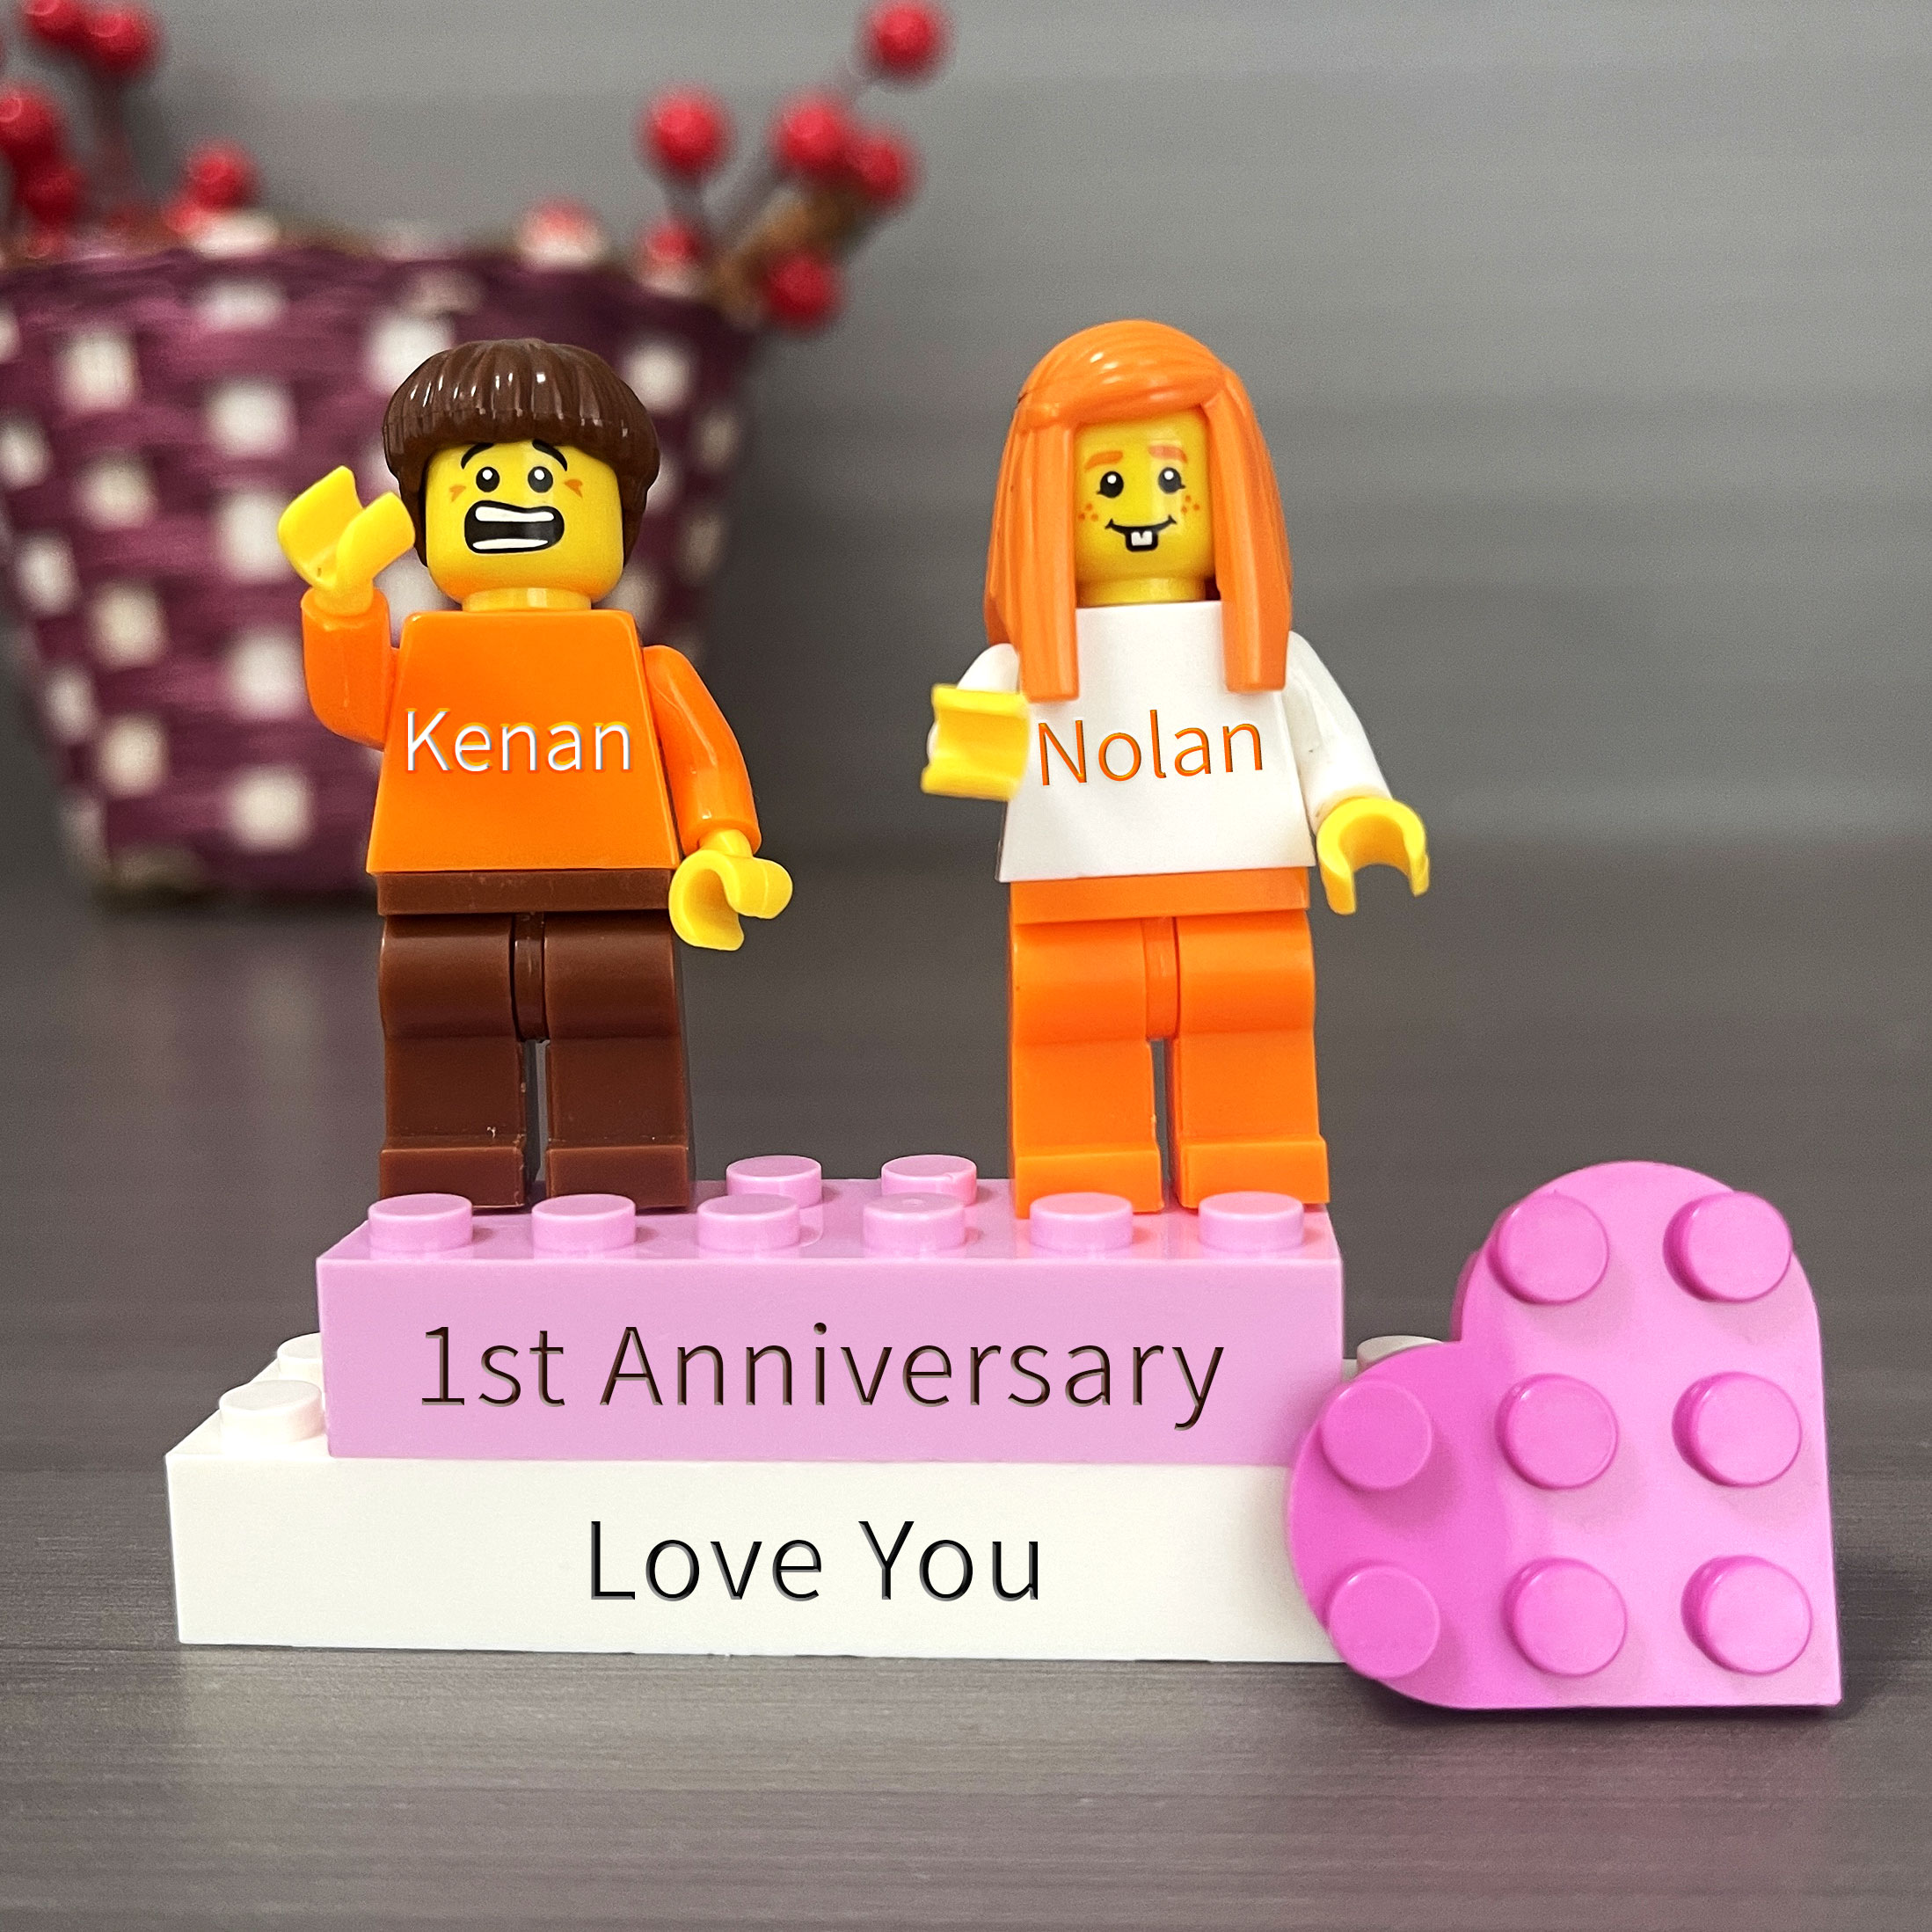 1st Anniversary Personalized Figures on Personalized Brick With Love/Pets For Happy Valentine's Day Merry Christmas